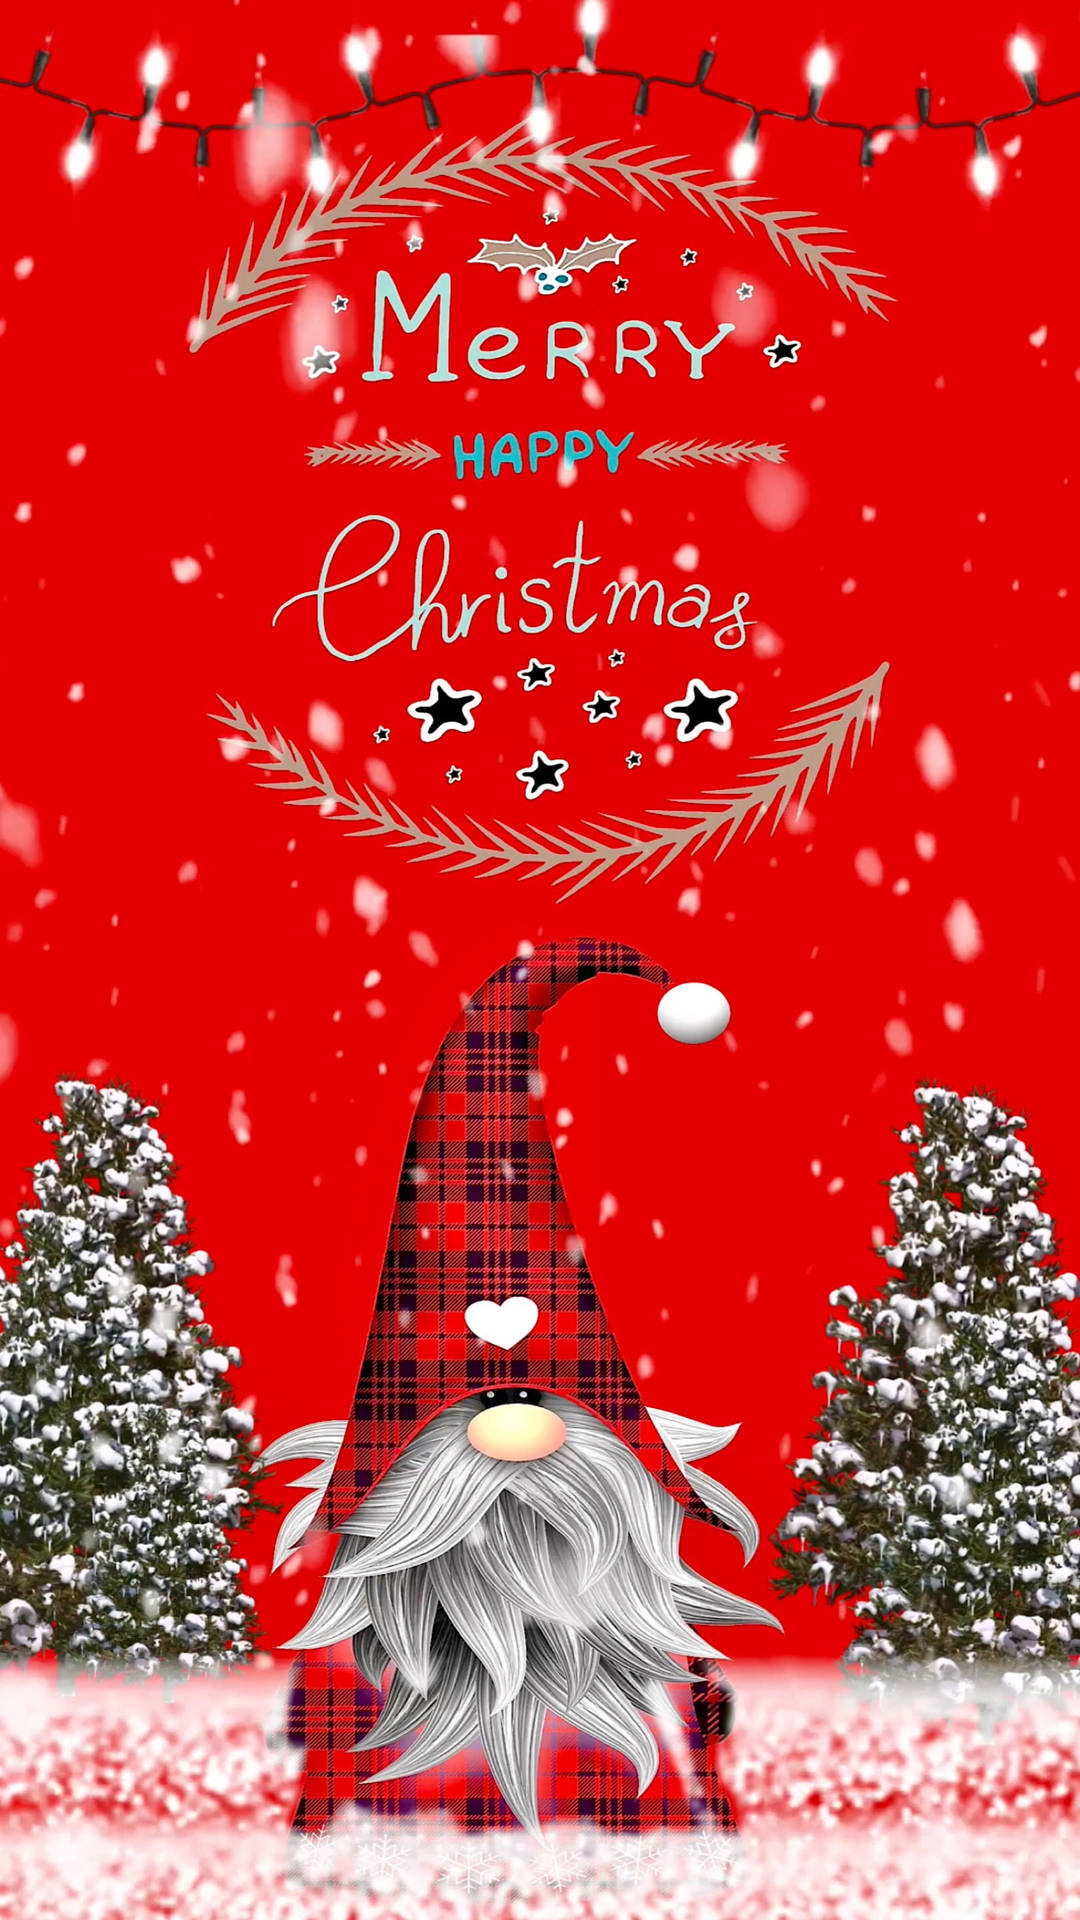 50 HD Christmas Wallpapers for iPhone Free Download